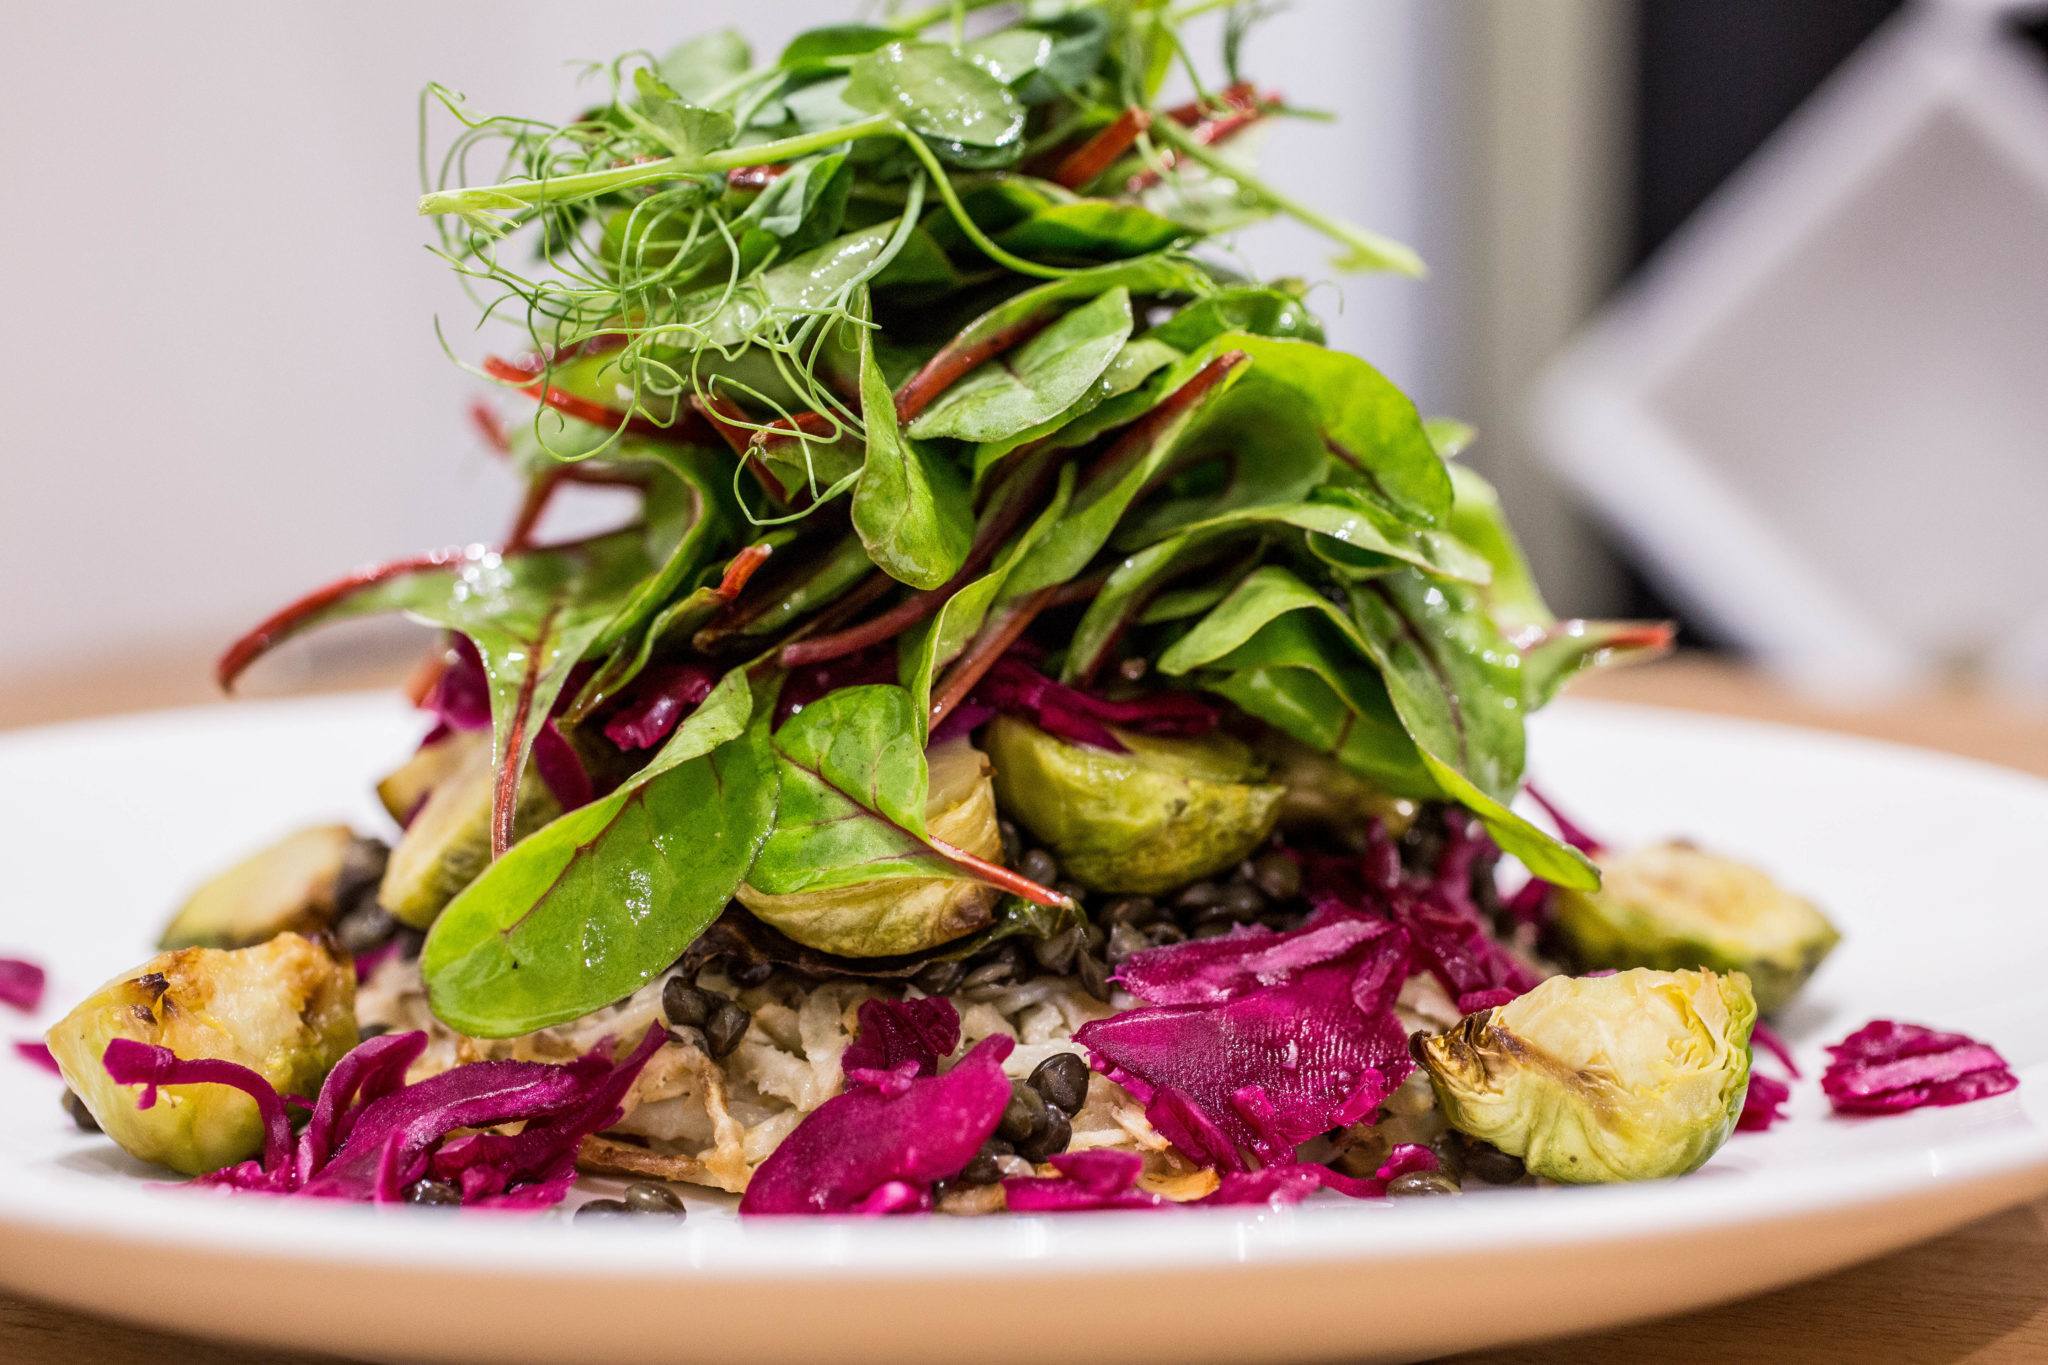 A dish of greens at The Canna Kitchen, the UK's first CBD restaurant. Hemp-based ingredients at the UK's CBD restaurant are source from crops grown organically in Spain and Switzerland.